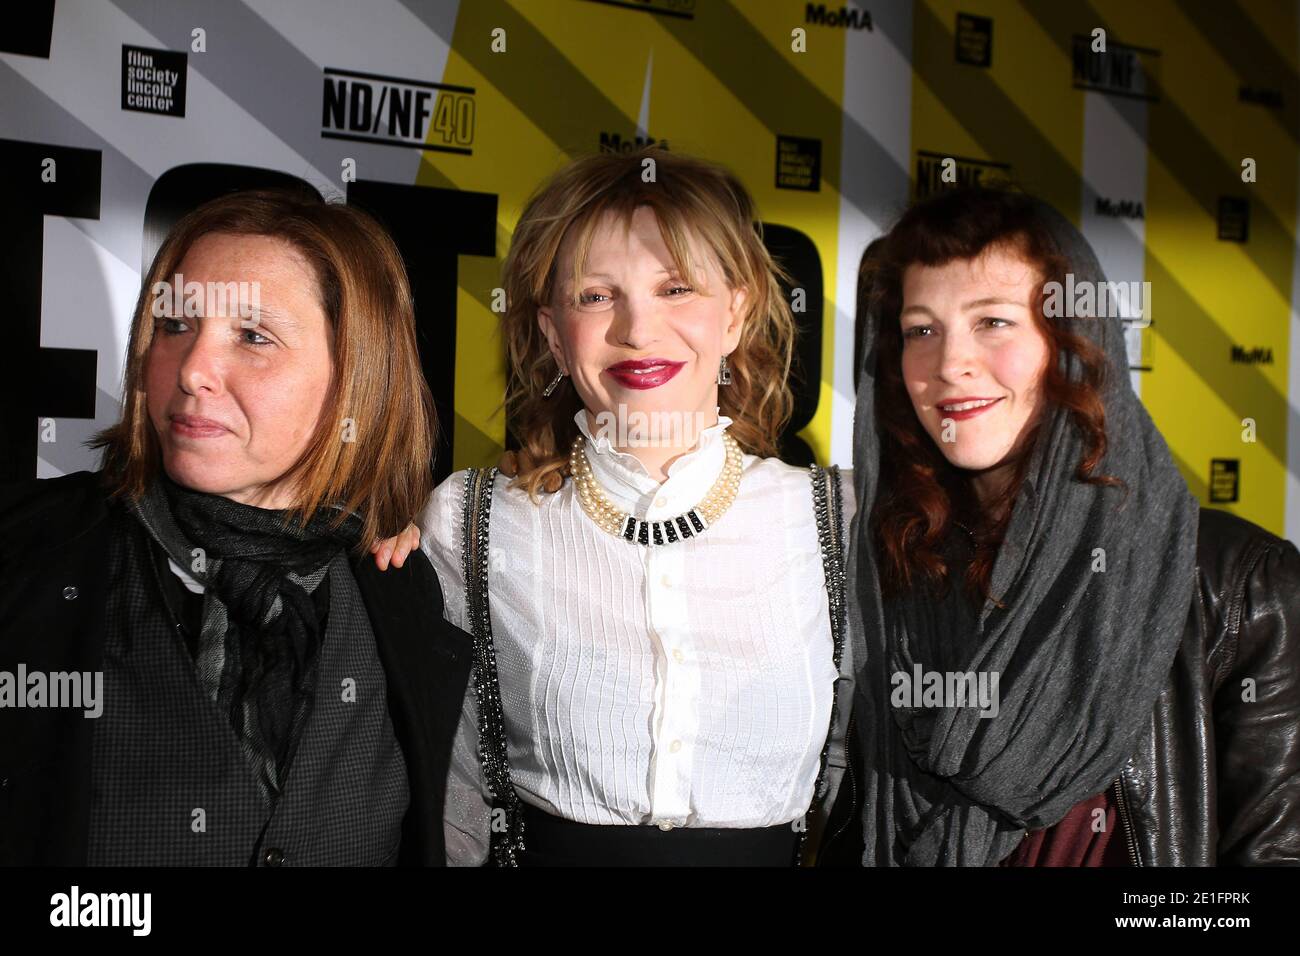 Musicians/film subjects (L-R) Patty Schemel, Courtney Love and Melissa auf der Maur attend the 2011 New Directors/New Films screening of 'Hit So Hard' at The Museum of Modern Art in New York City, NY, USA on March 28, 2011. Photo by Charles Guerin/ABACAPRESS.COM Stock Photo